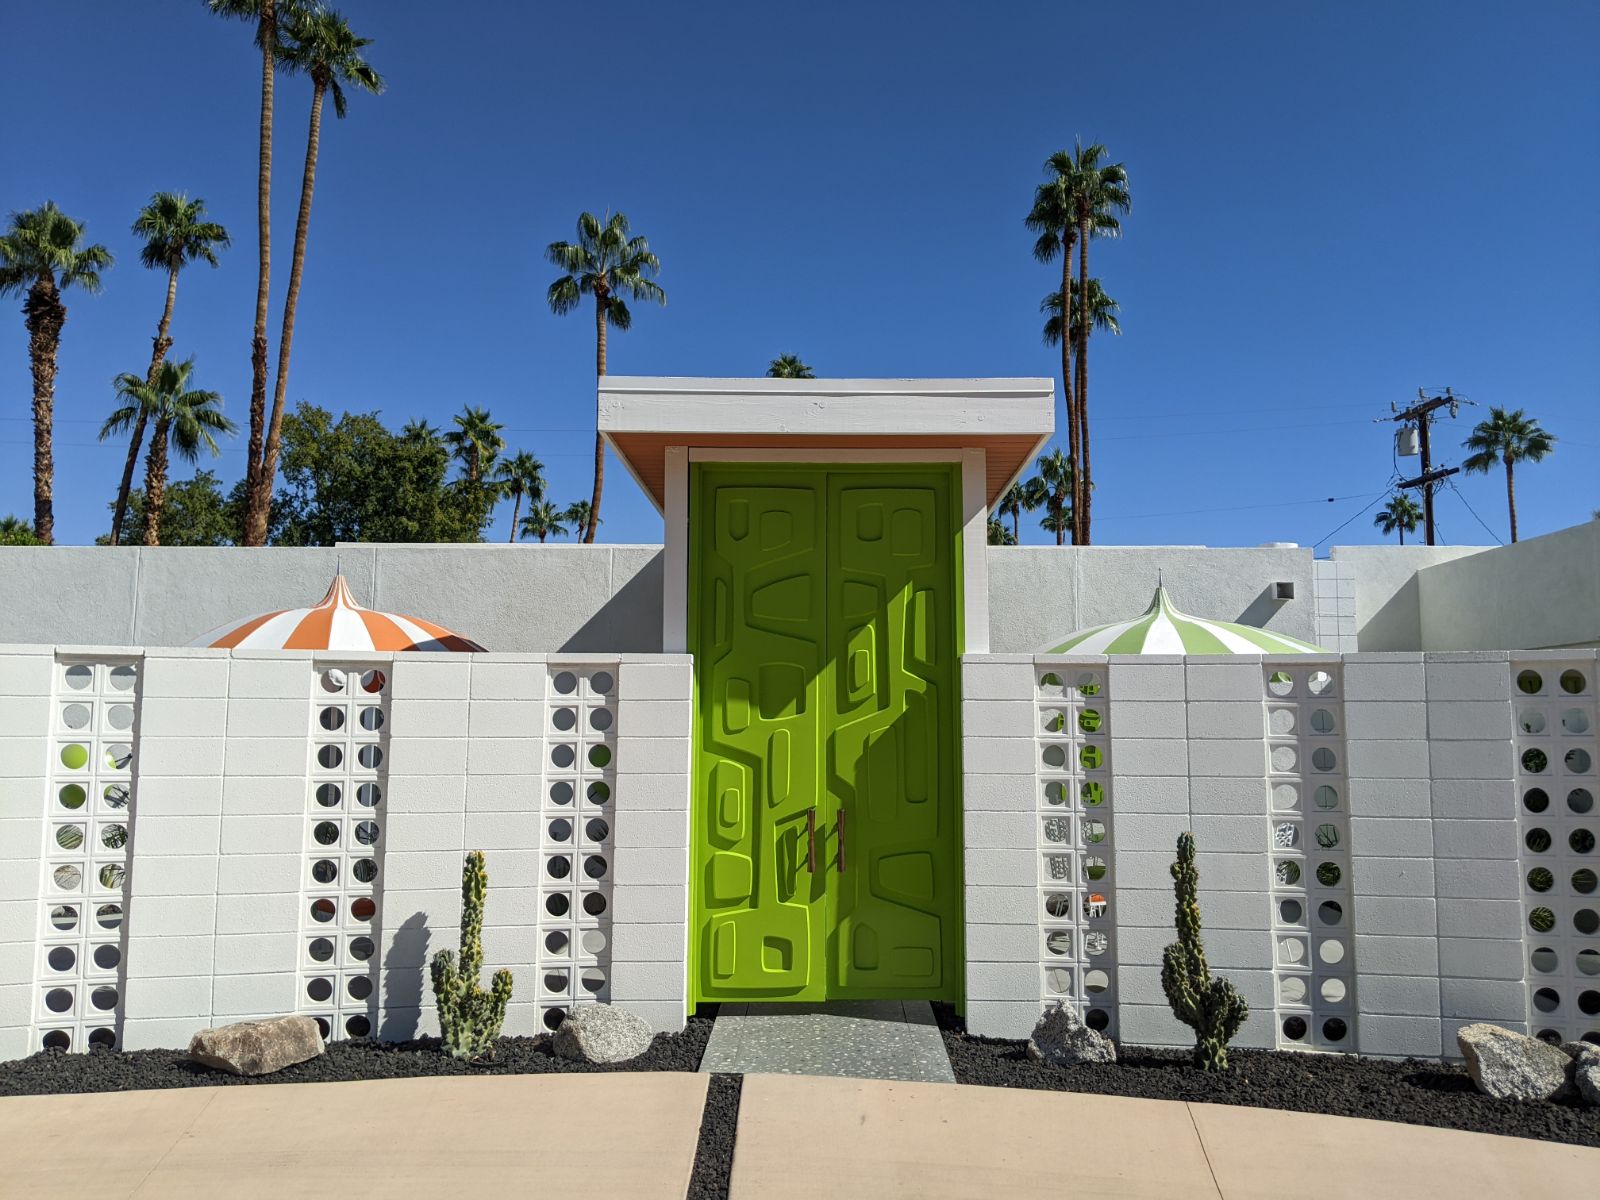 Palm Springs, California: Modernist Glam and Outdoor Excitement